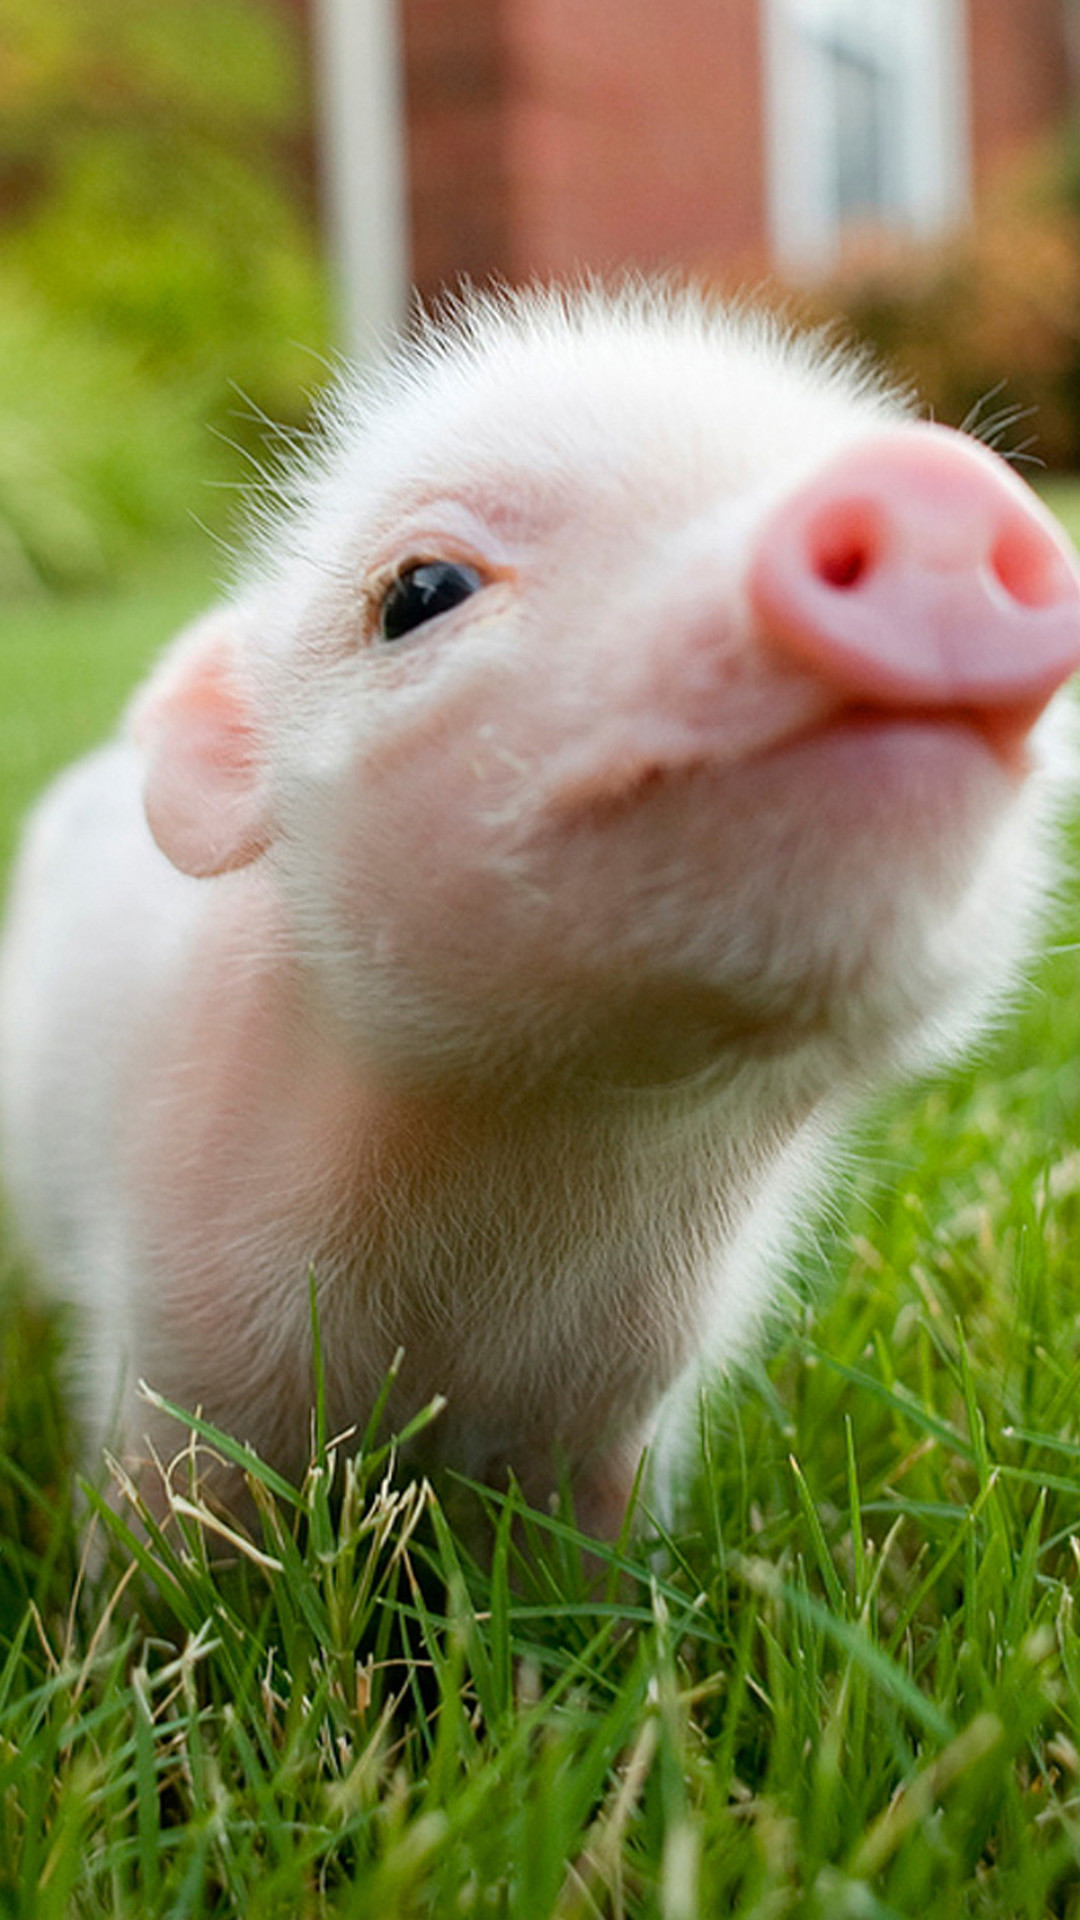 1080x1920 Cute pig LG G2 Wallpapers, LG G2 Wallpapers, LG Wallpapers